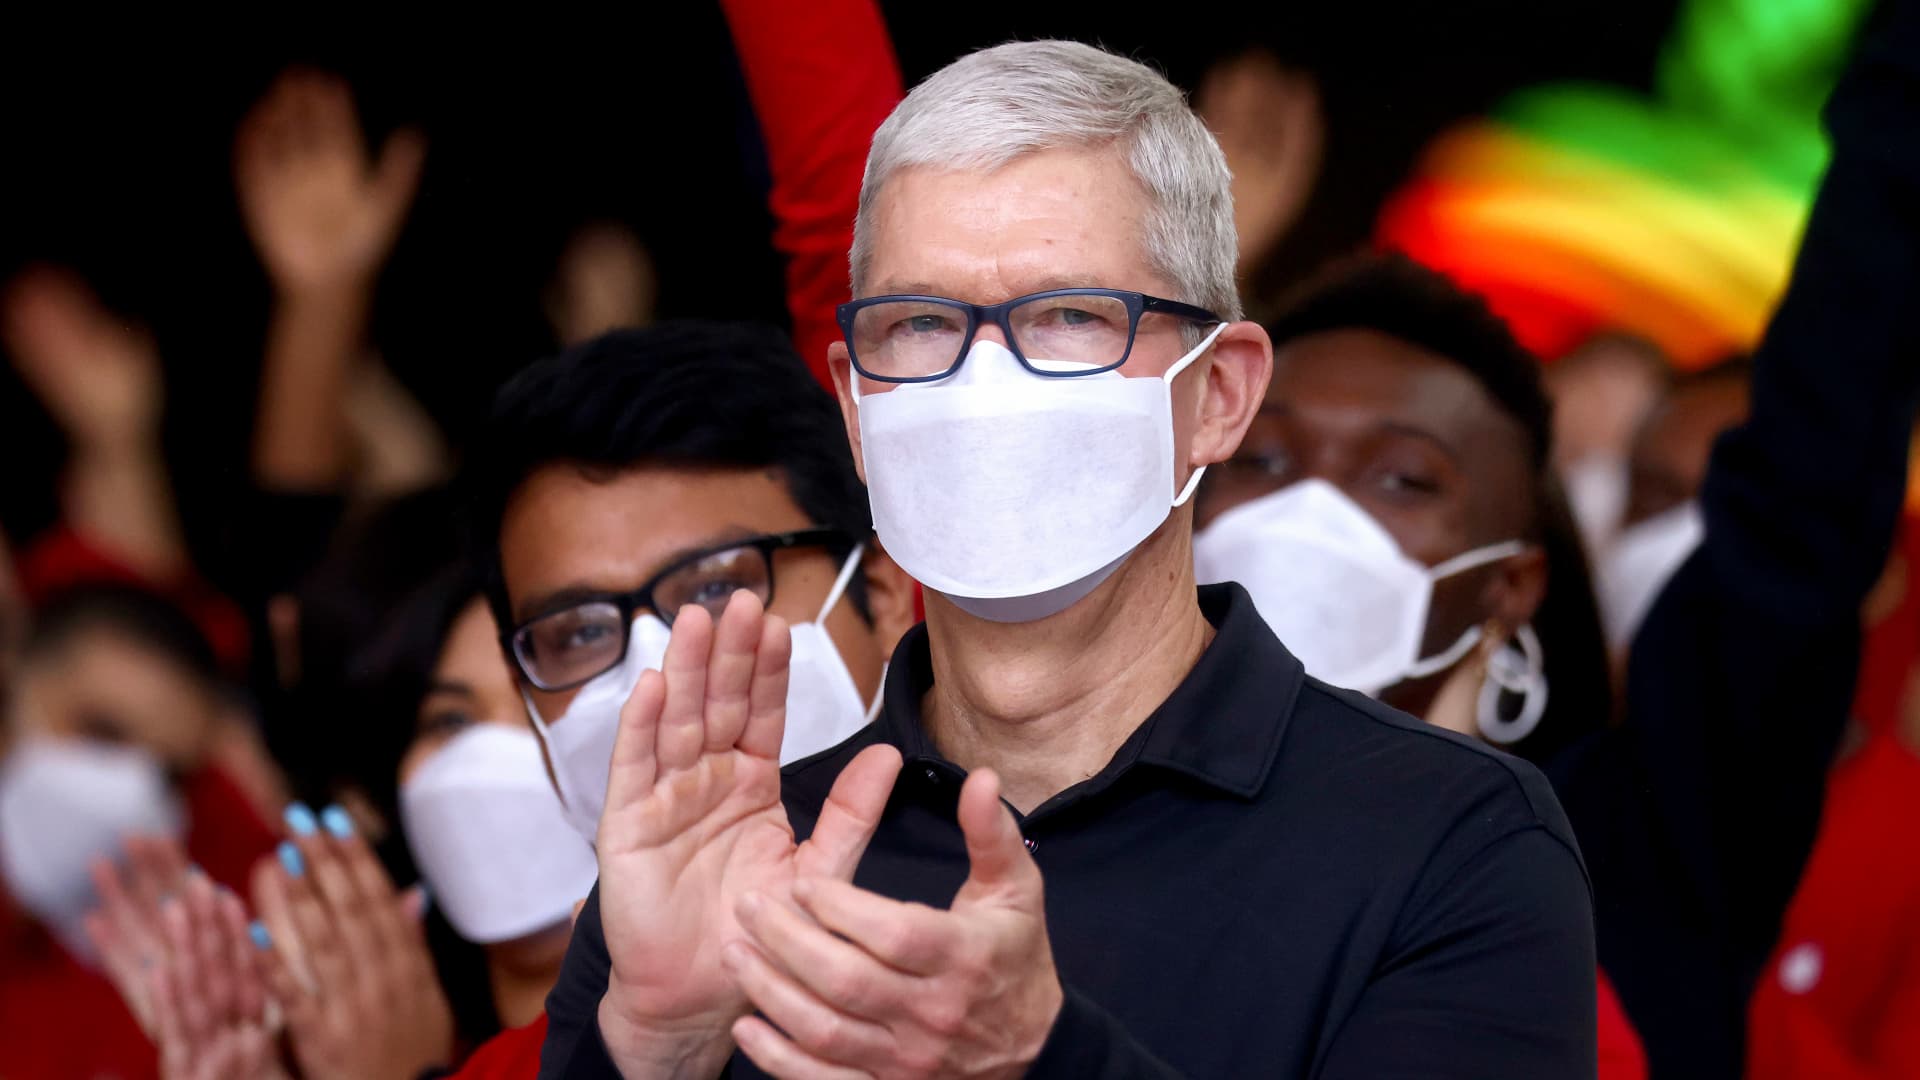 Apple CEO Tim Cook attends the grand opening event of the new Apple store at The Grove on November 19, 2021 in Los Angeles, California.